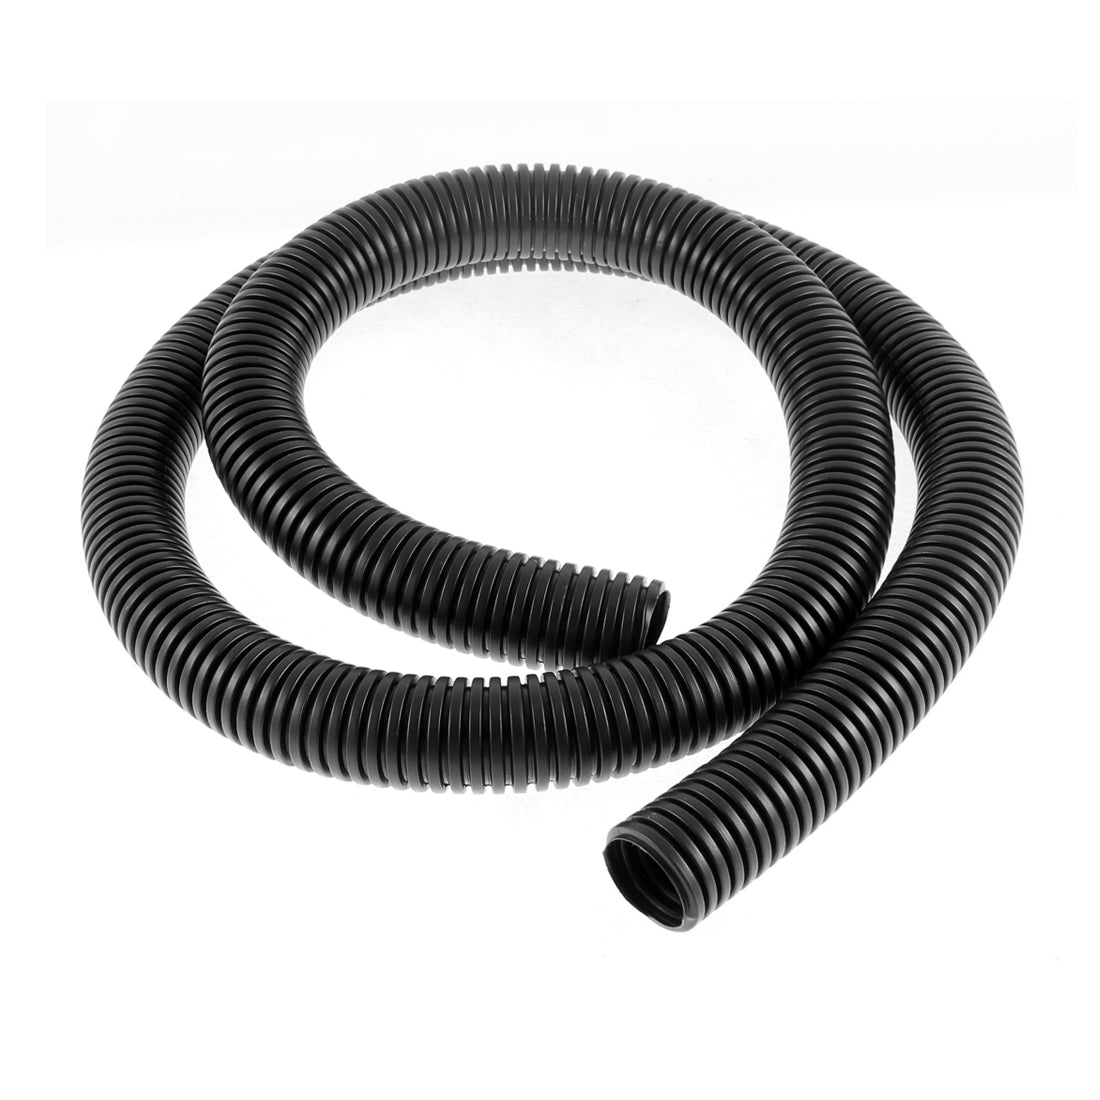 uxcell Uxcell 1.2 M 21 x 25 mm Plastic Corrugated Conduit Tube for Garden,Office Black